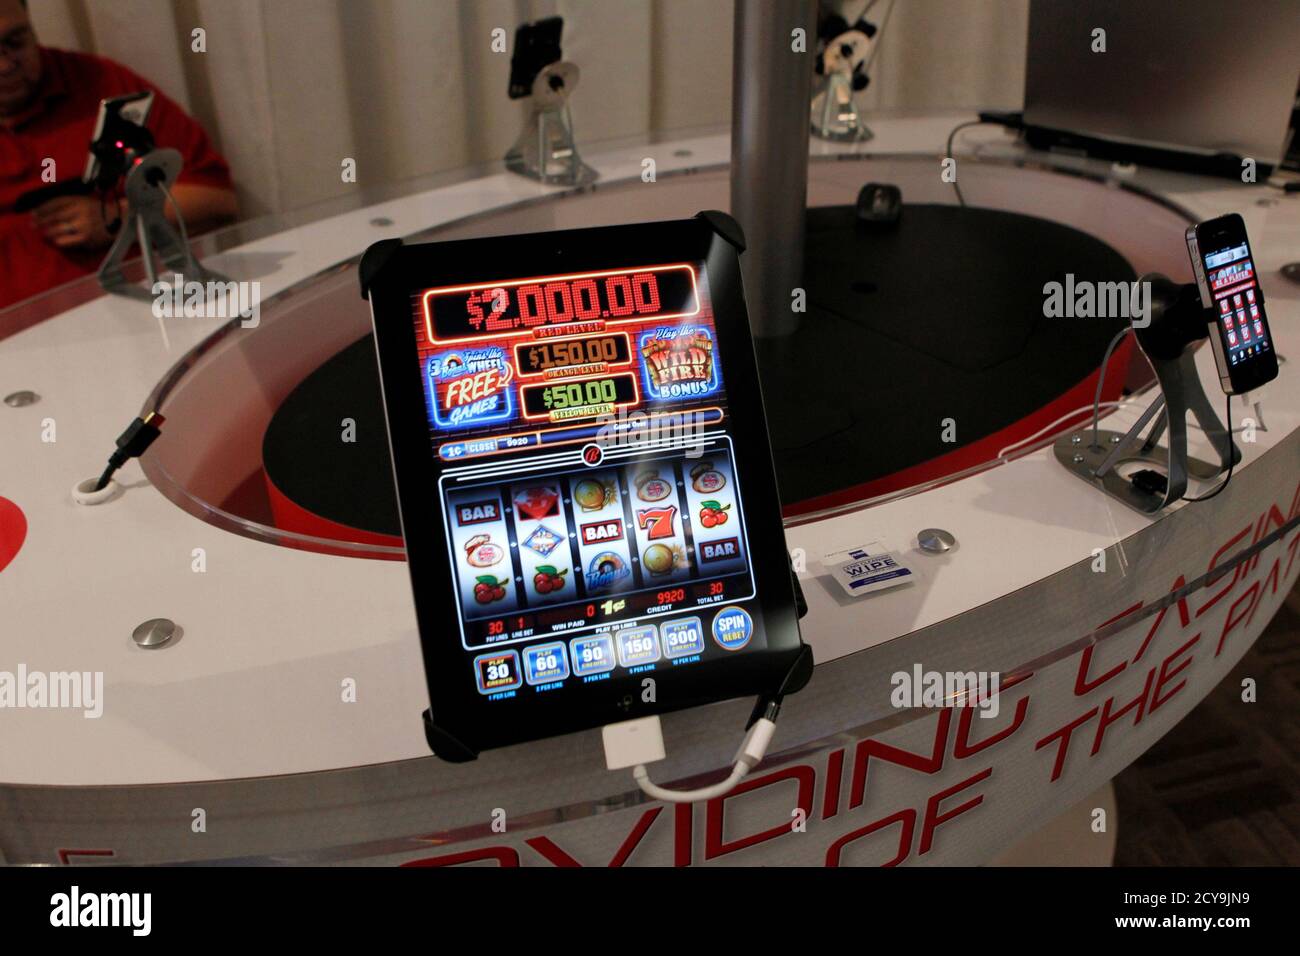 San Manuel Indian Bingo and Casino's online gambling app "Code Red" is demonstrated in the exhibitors room at the GiGse online gaming convention at the Westin hotel in San Francisco, California,